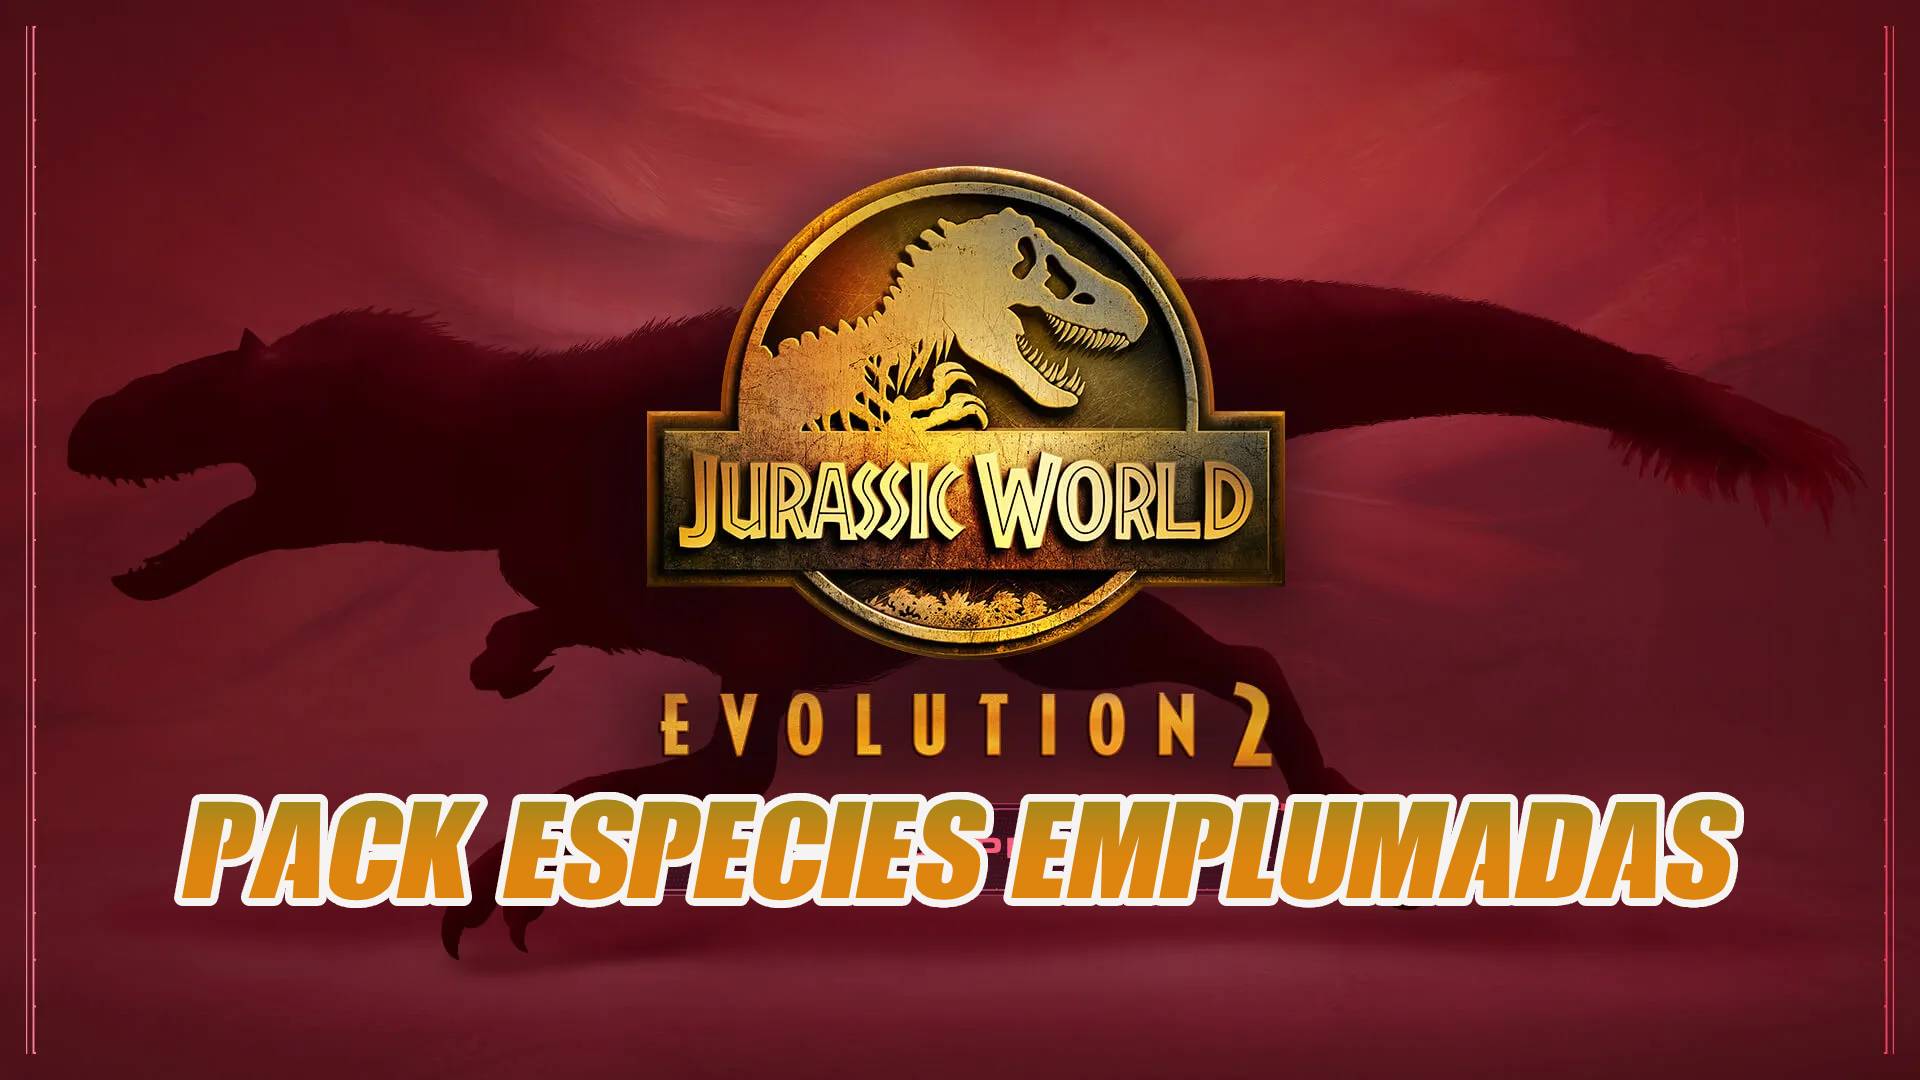 Jurassic World Evolution 2 celebrates the release of the Feathered Species Pack